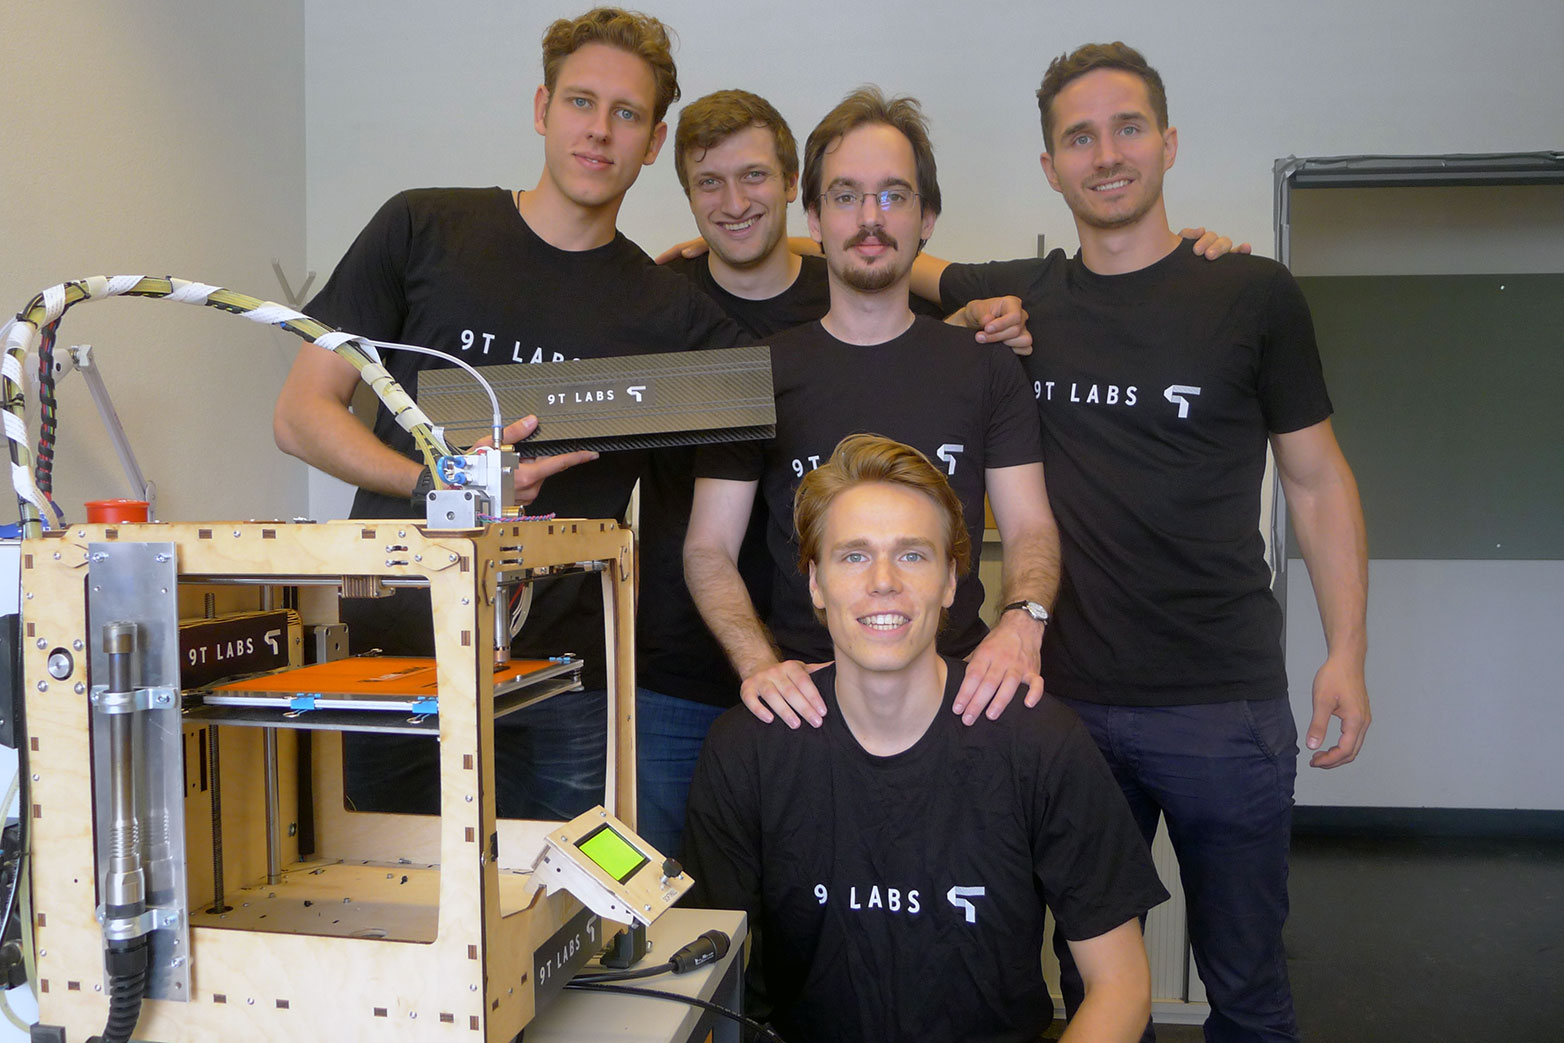 Enlarged view: Part of 9T Labs team (left to right): Giovanni Cavolina, Filippo Kusch, Selçuk Ercan, Martin Eichenhofer, Chester Houwink next to the prototype 3D printer. (Photograph: Courtesy of 9T Labs)